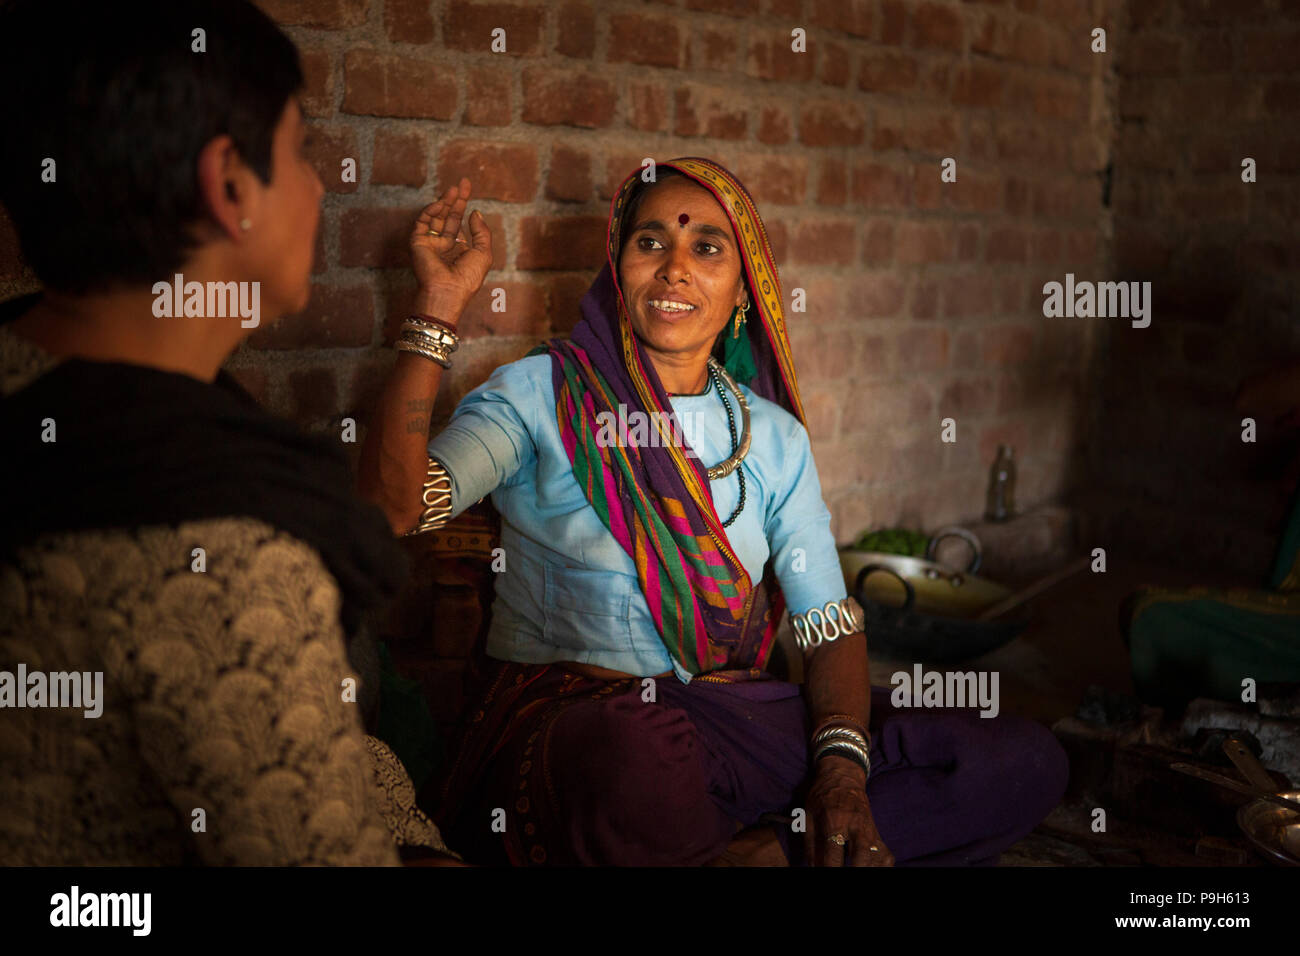 A group of women discussing organic farming in the kitchen of their farm home in rural India. Stock Photo